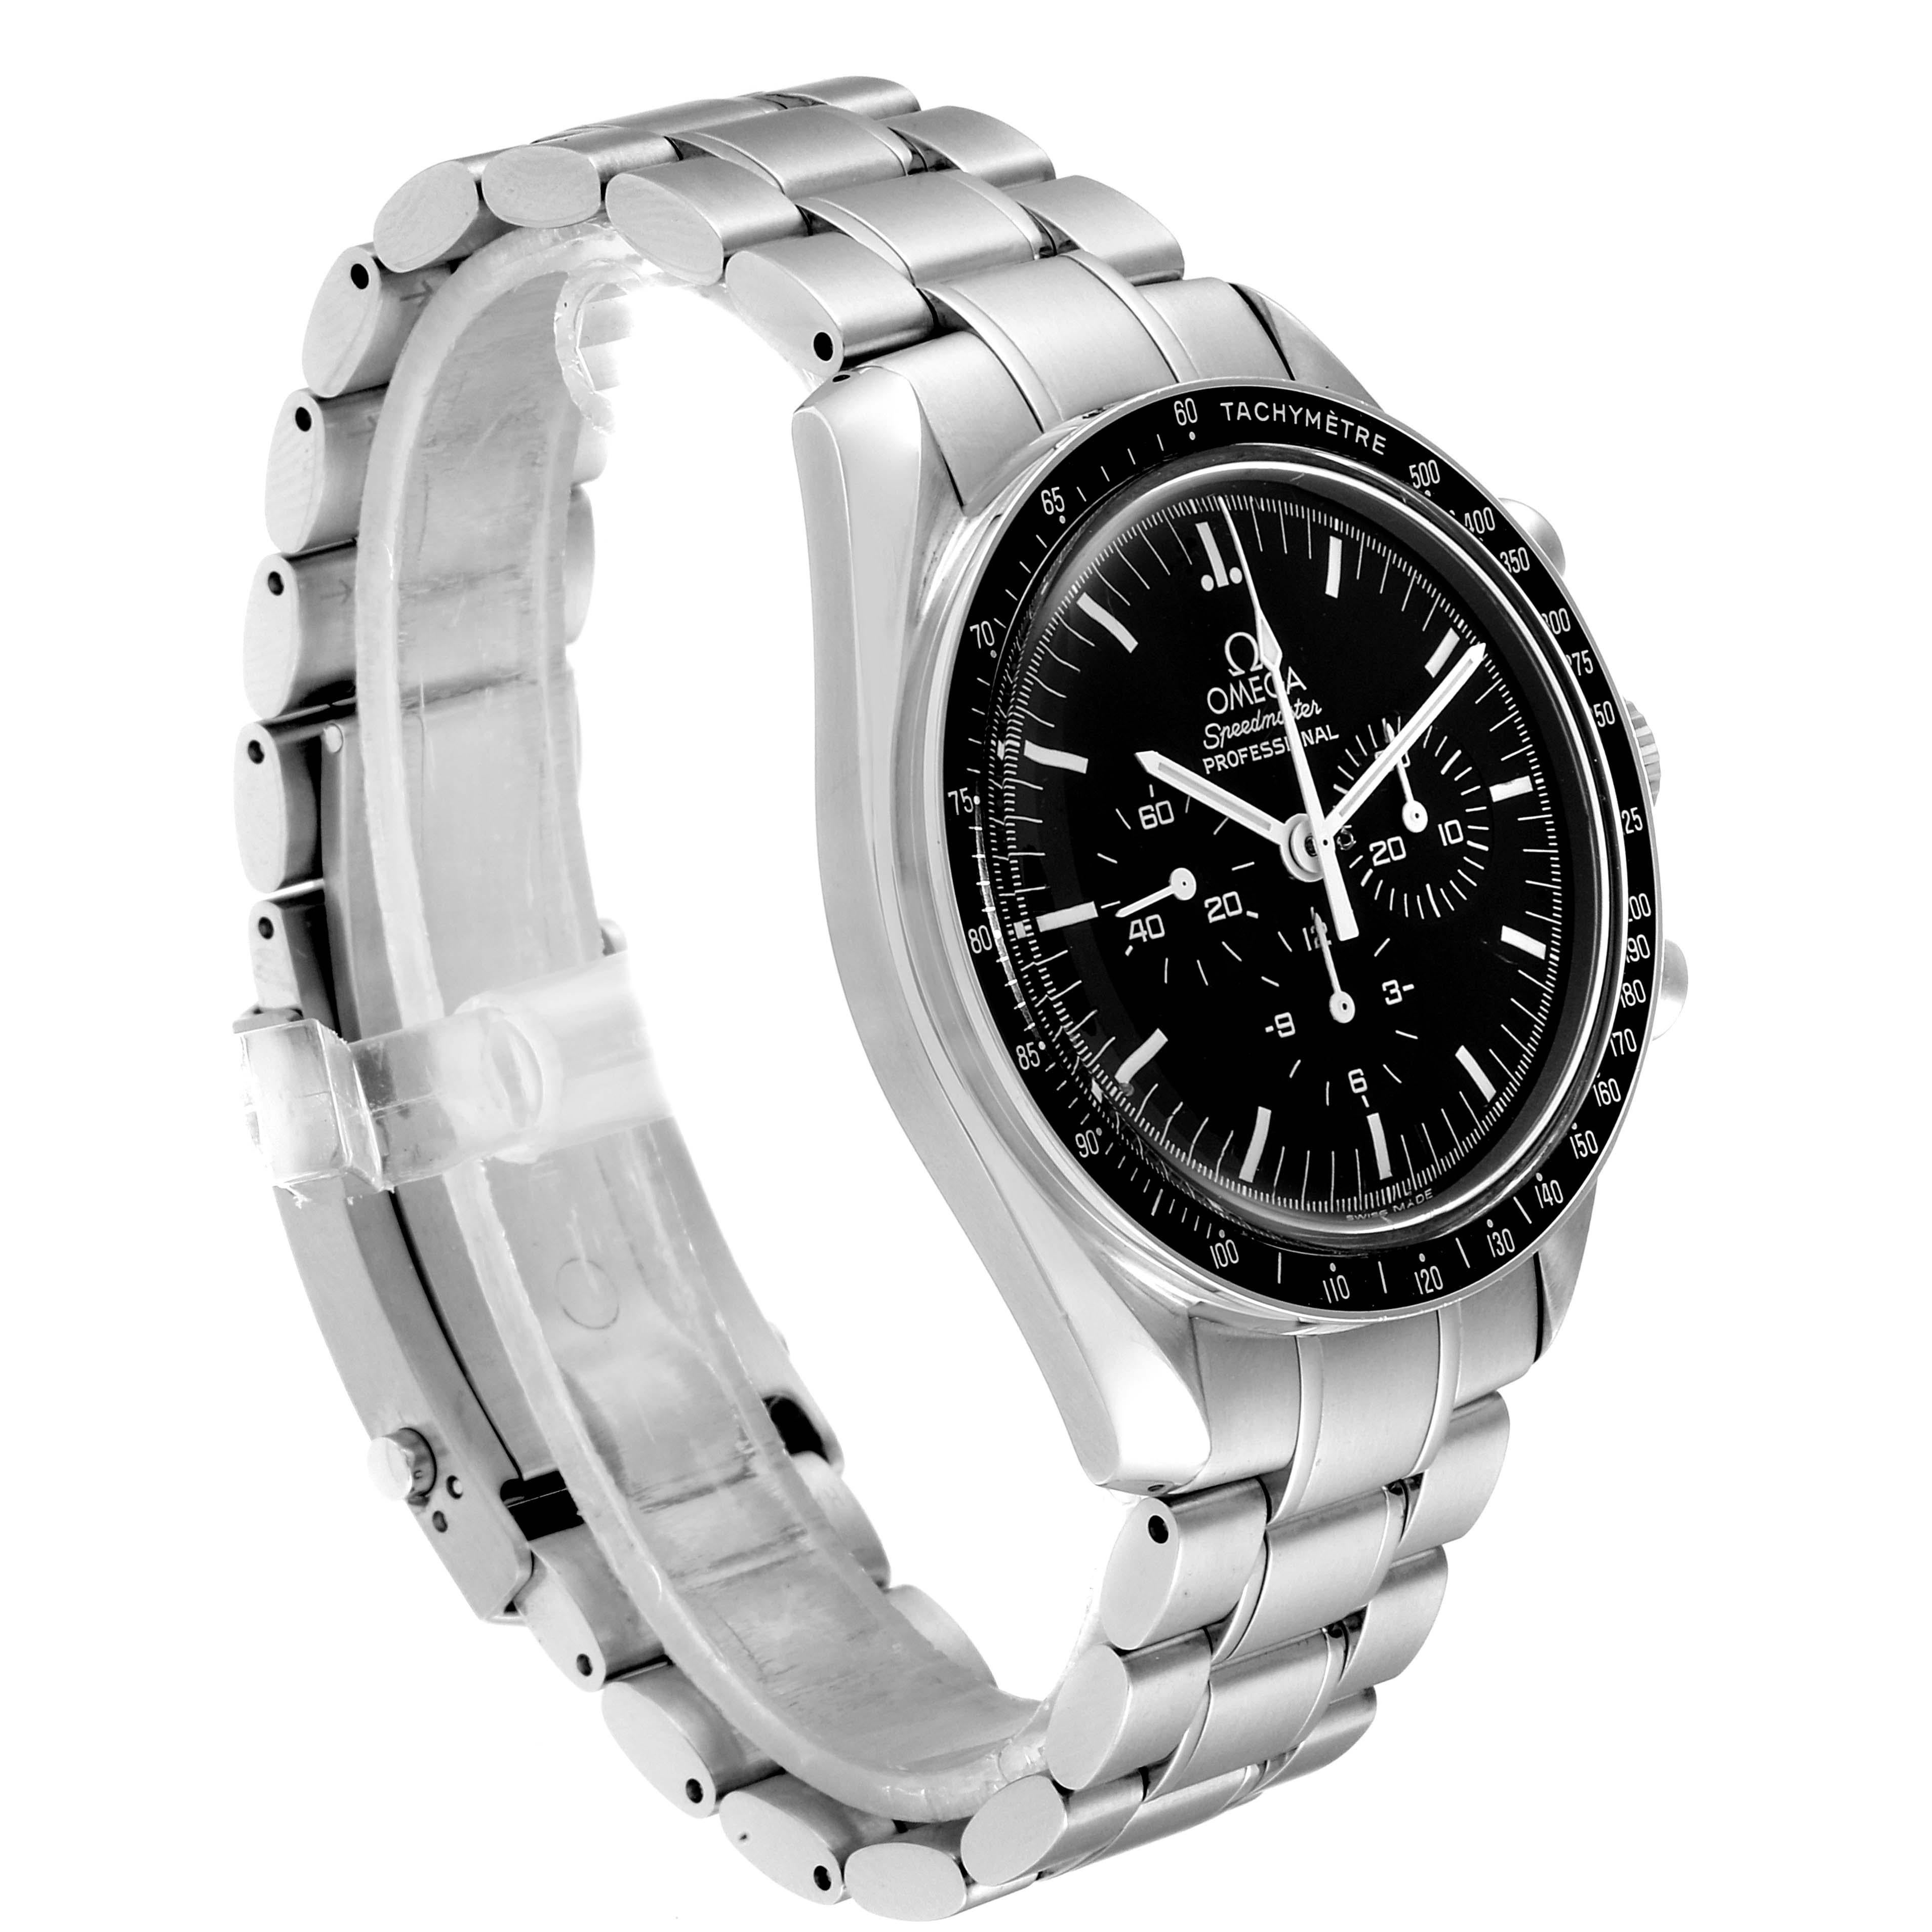 Omega Speedmaster Chronograph Men’s MoonWatch 3570.50.00 Box Card In Excellent Condition For Sale In Atlanta, GA